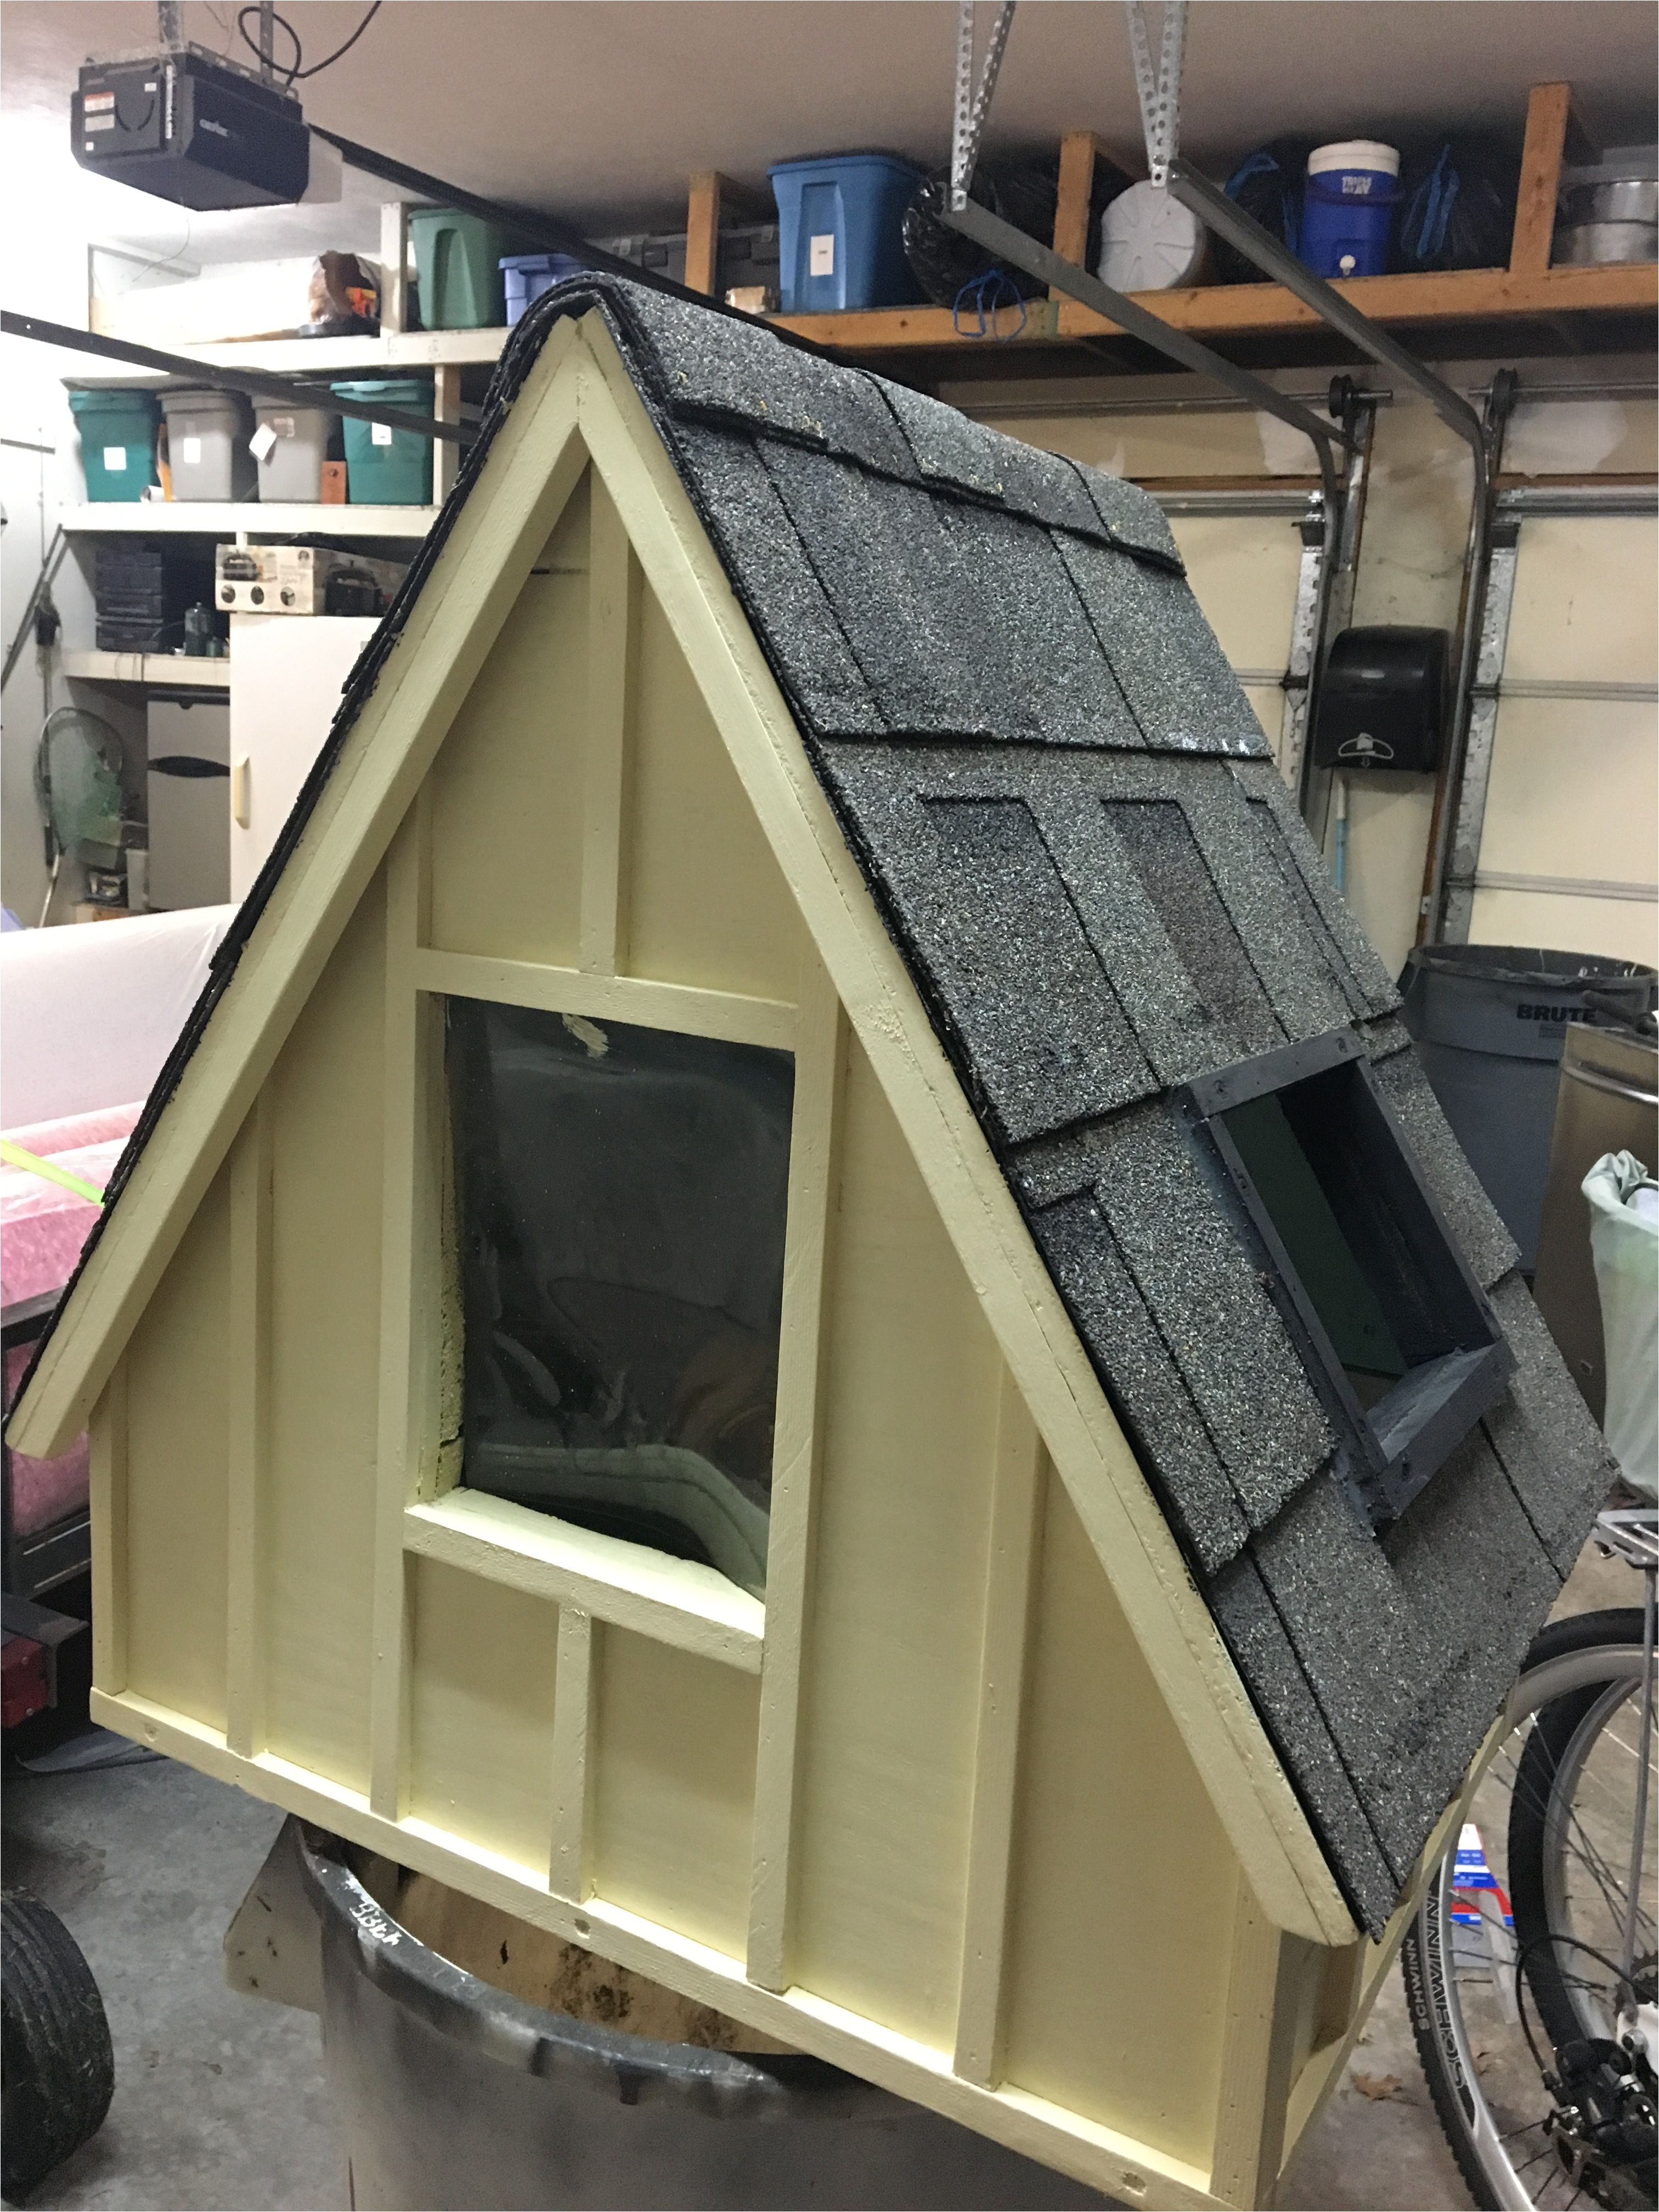 outdoor cat house insulated for cold weather